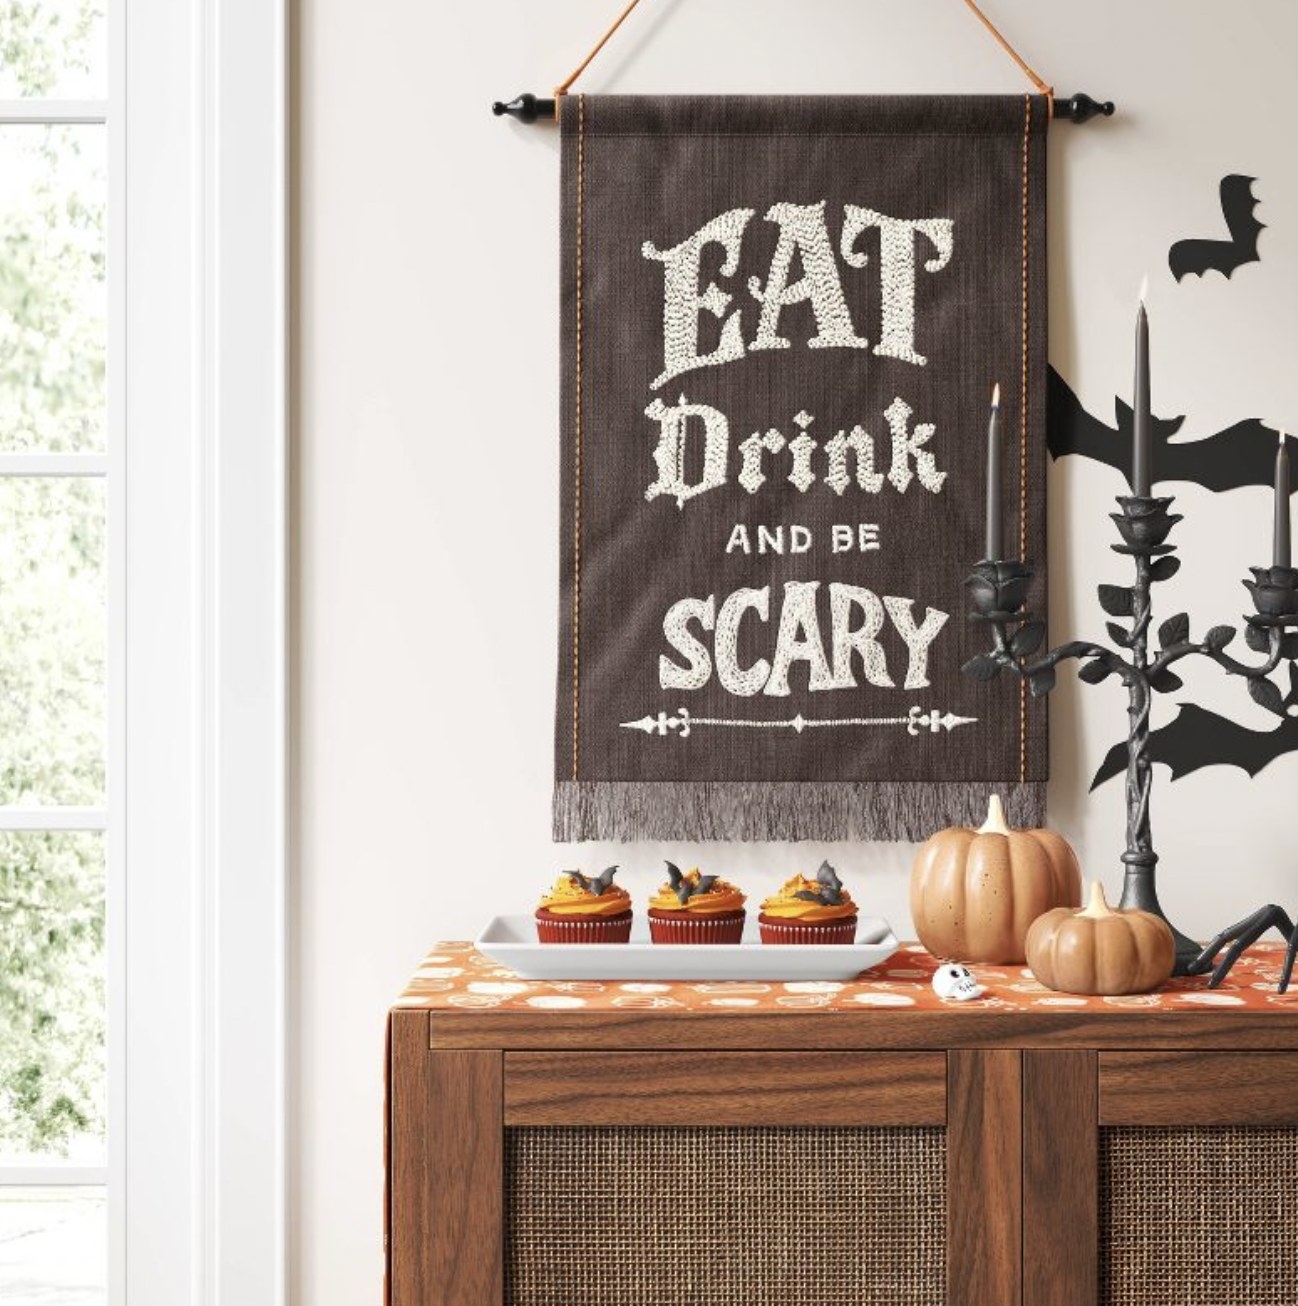 The small and medium ceramic pumpkins siting atop table next to platter of orange-frosted cupcakes. Banner on wall reads &quot;eat drink and be scary&quot;